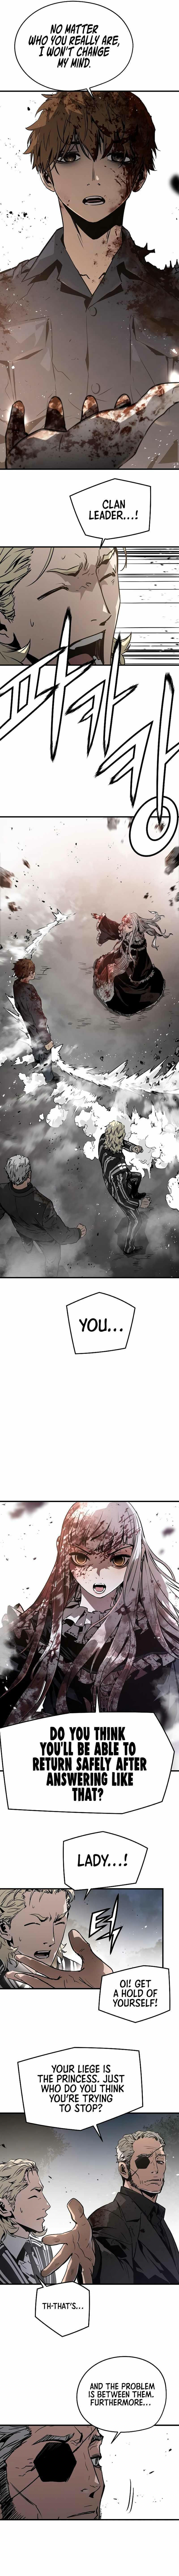 The Breaker: Eternal Force Chapter 76 page 13 - 